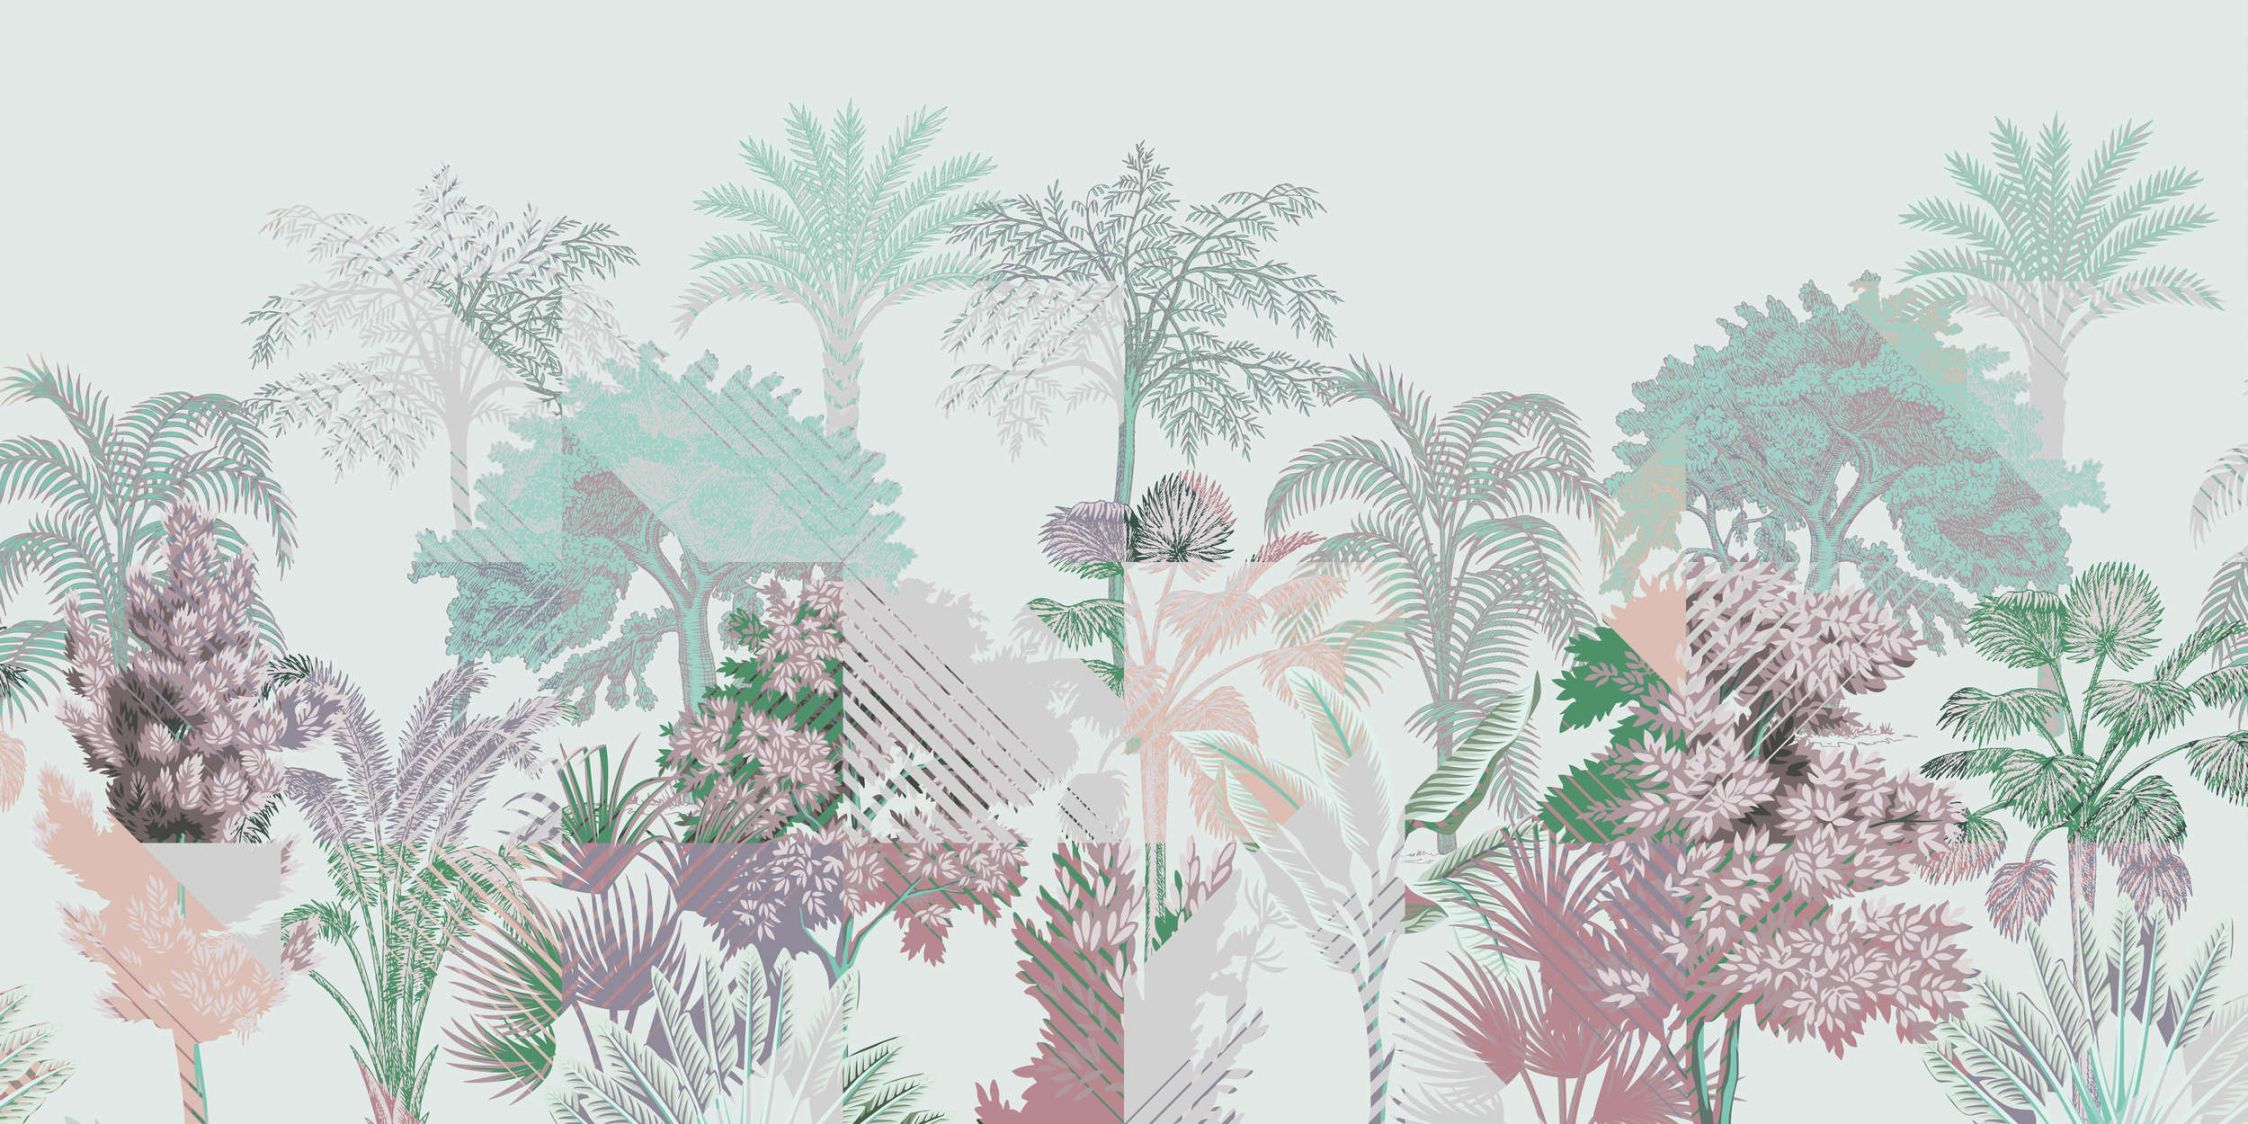             Photo wallpaper »esplanade 1« - jungle patchwork with bushes - green, pink | light textured non-woven
        